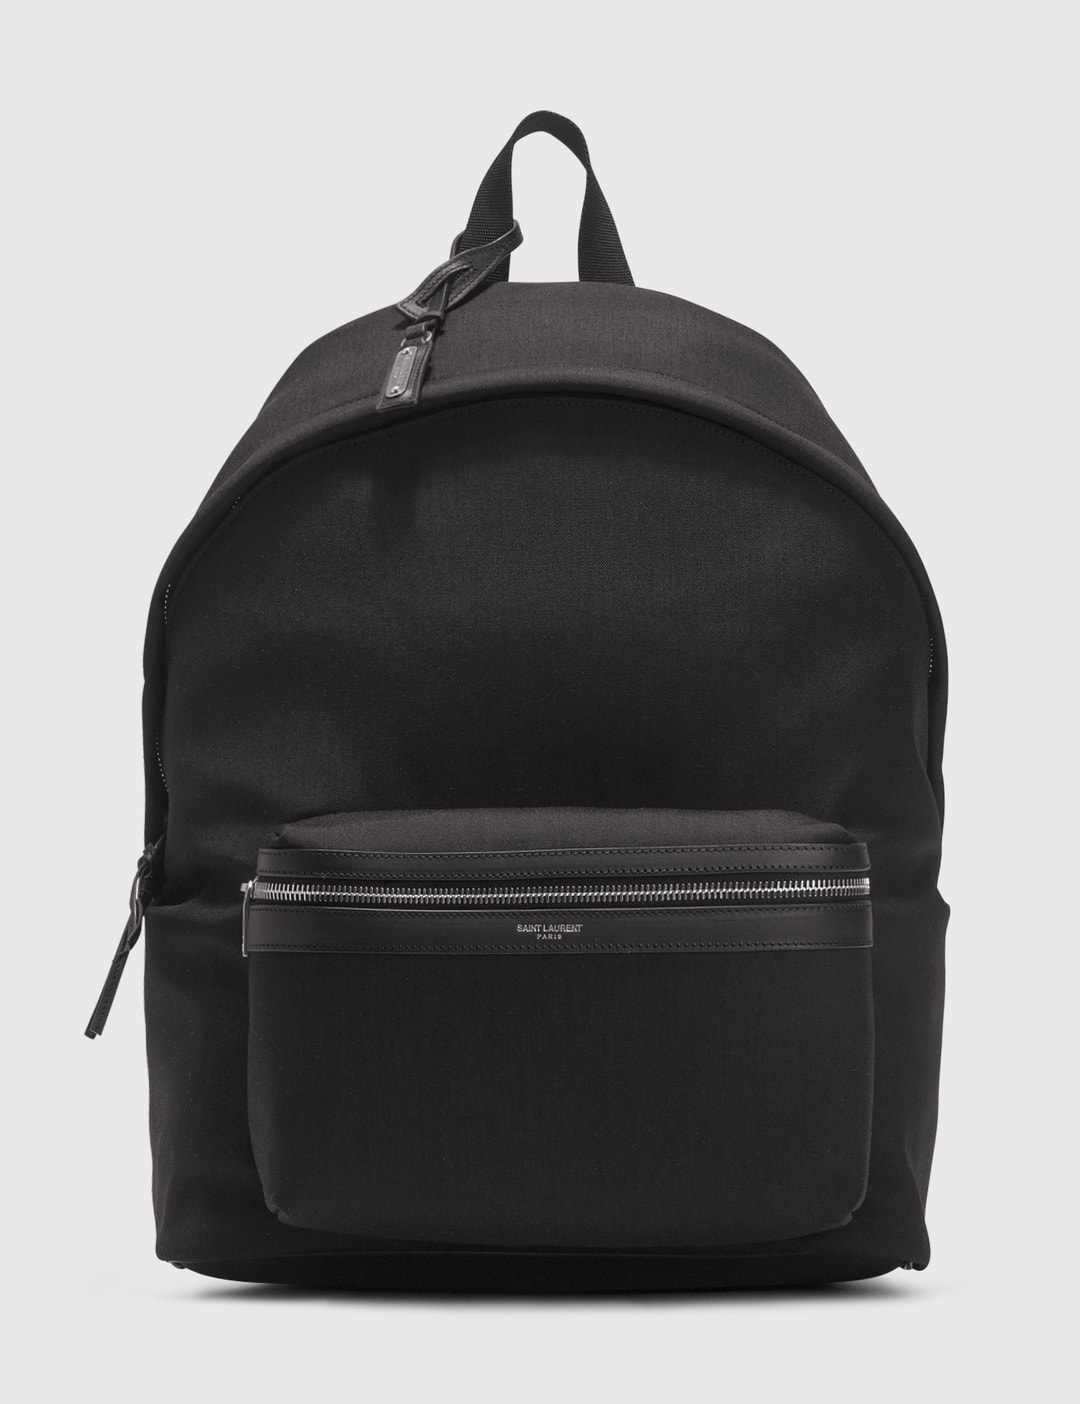 Saint Laurent - City Backpack | HBX - Globally Curated Fashion and ...